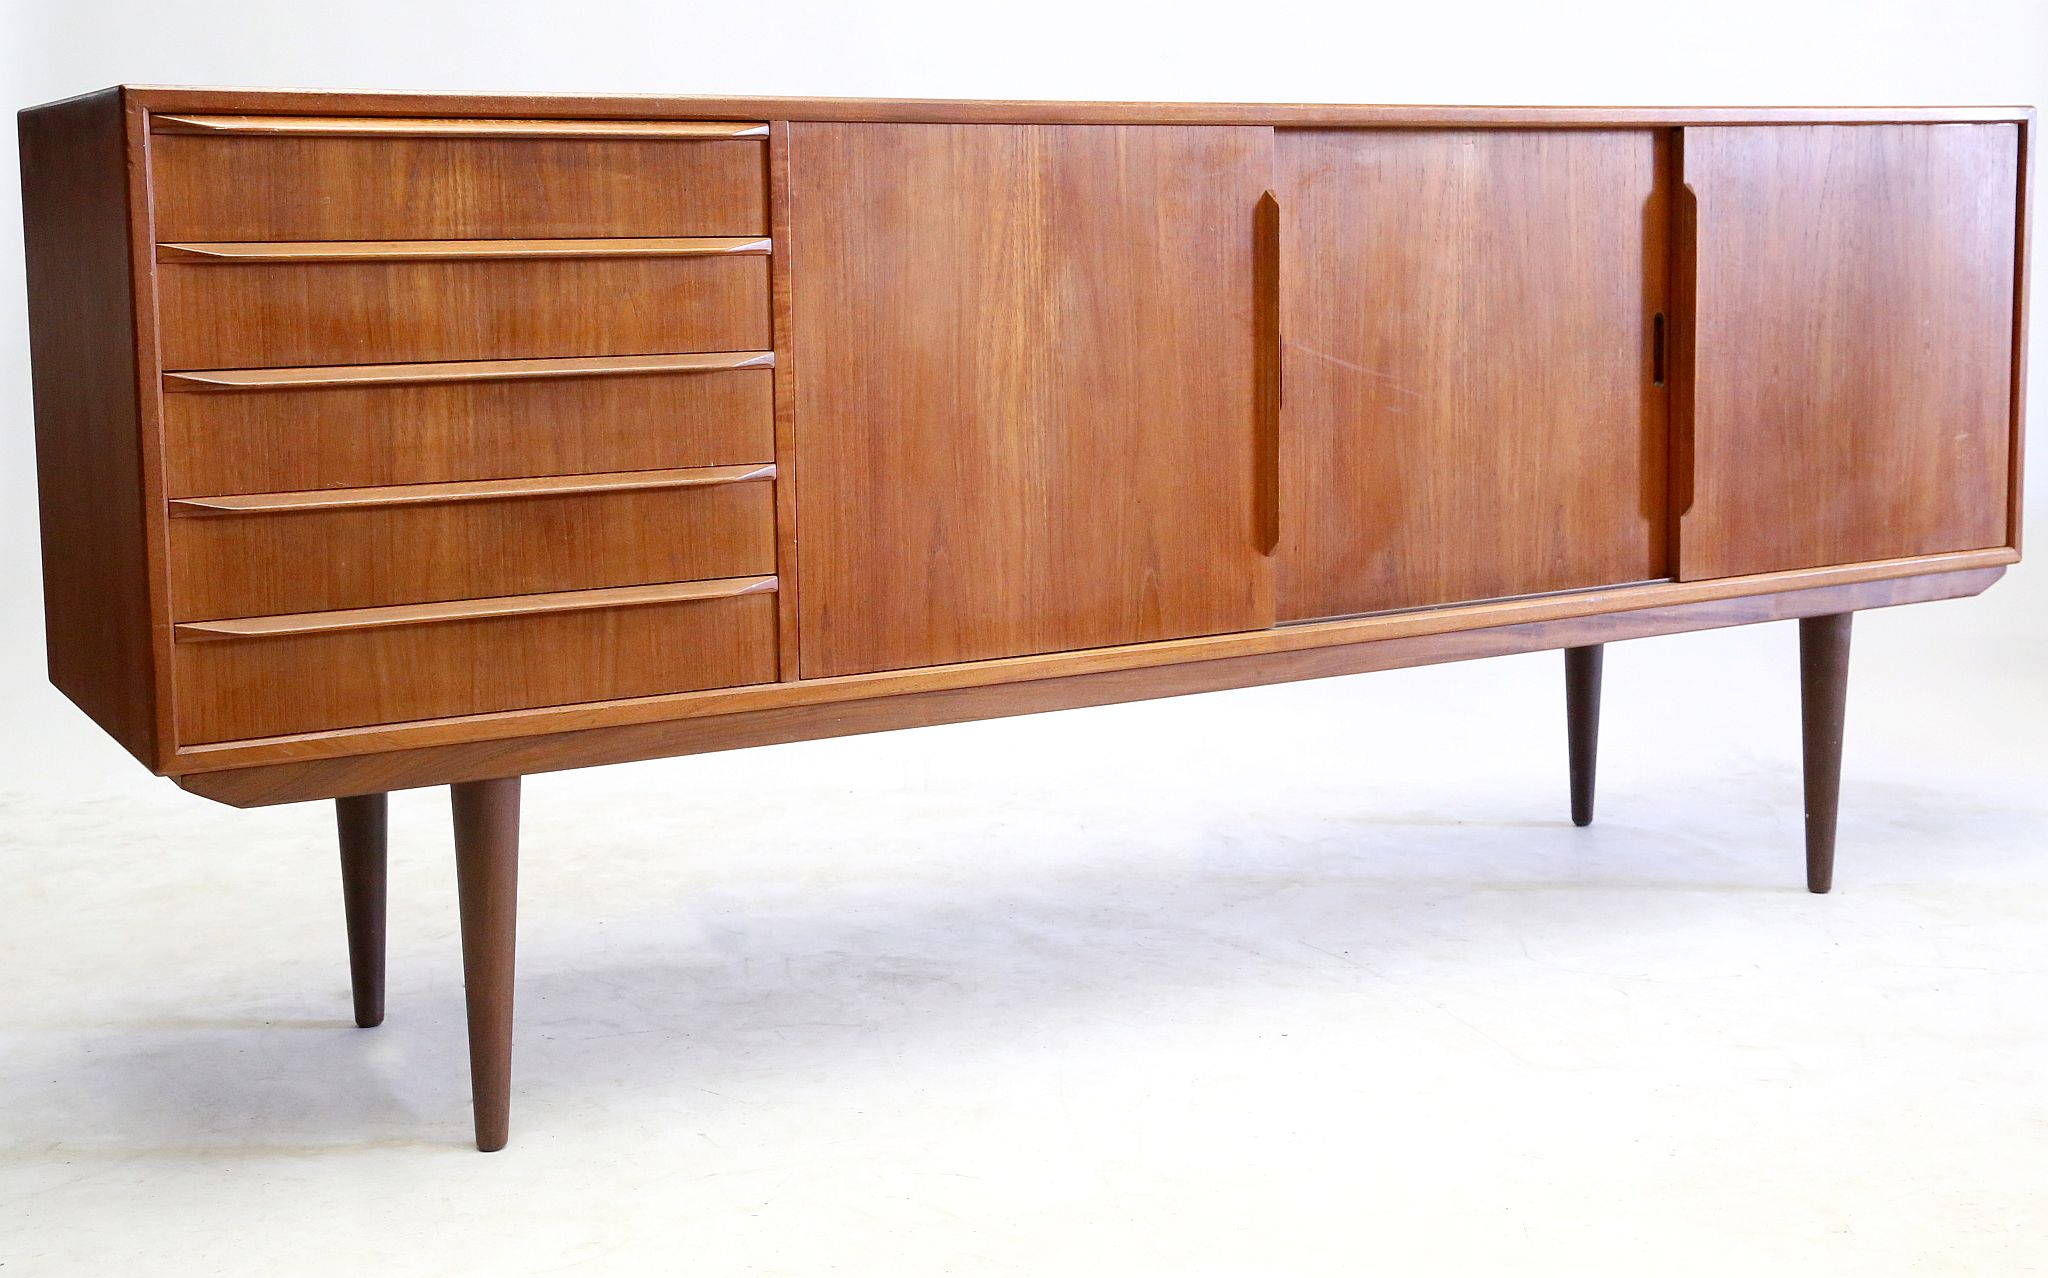 A DANISH 1960s TEAK SIDEBOARD, attributed to Svend - Image 3 of 10